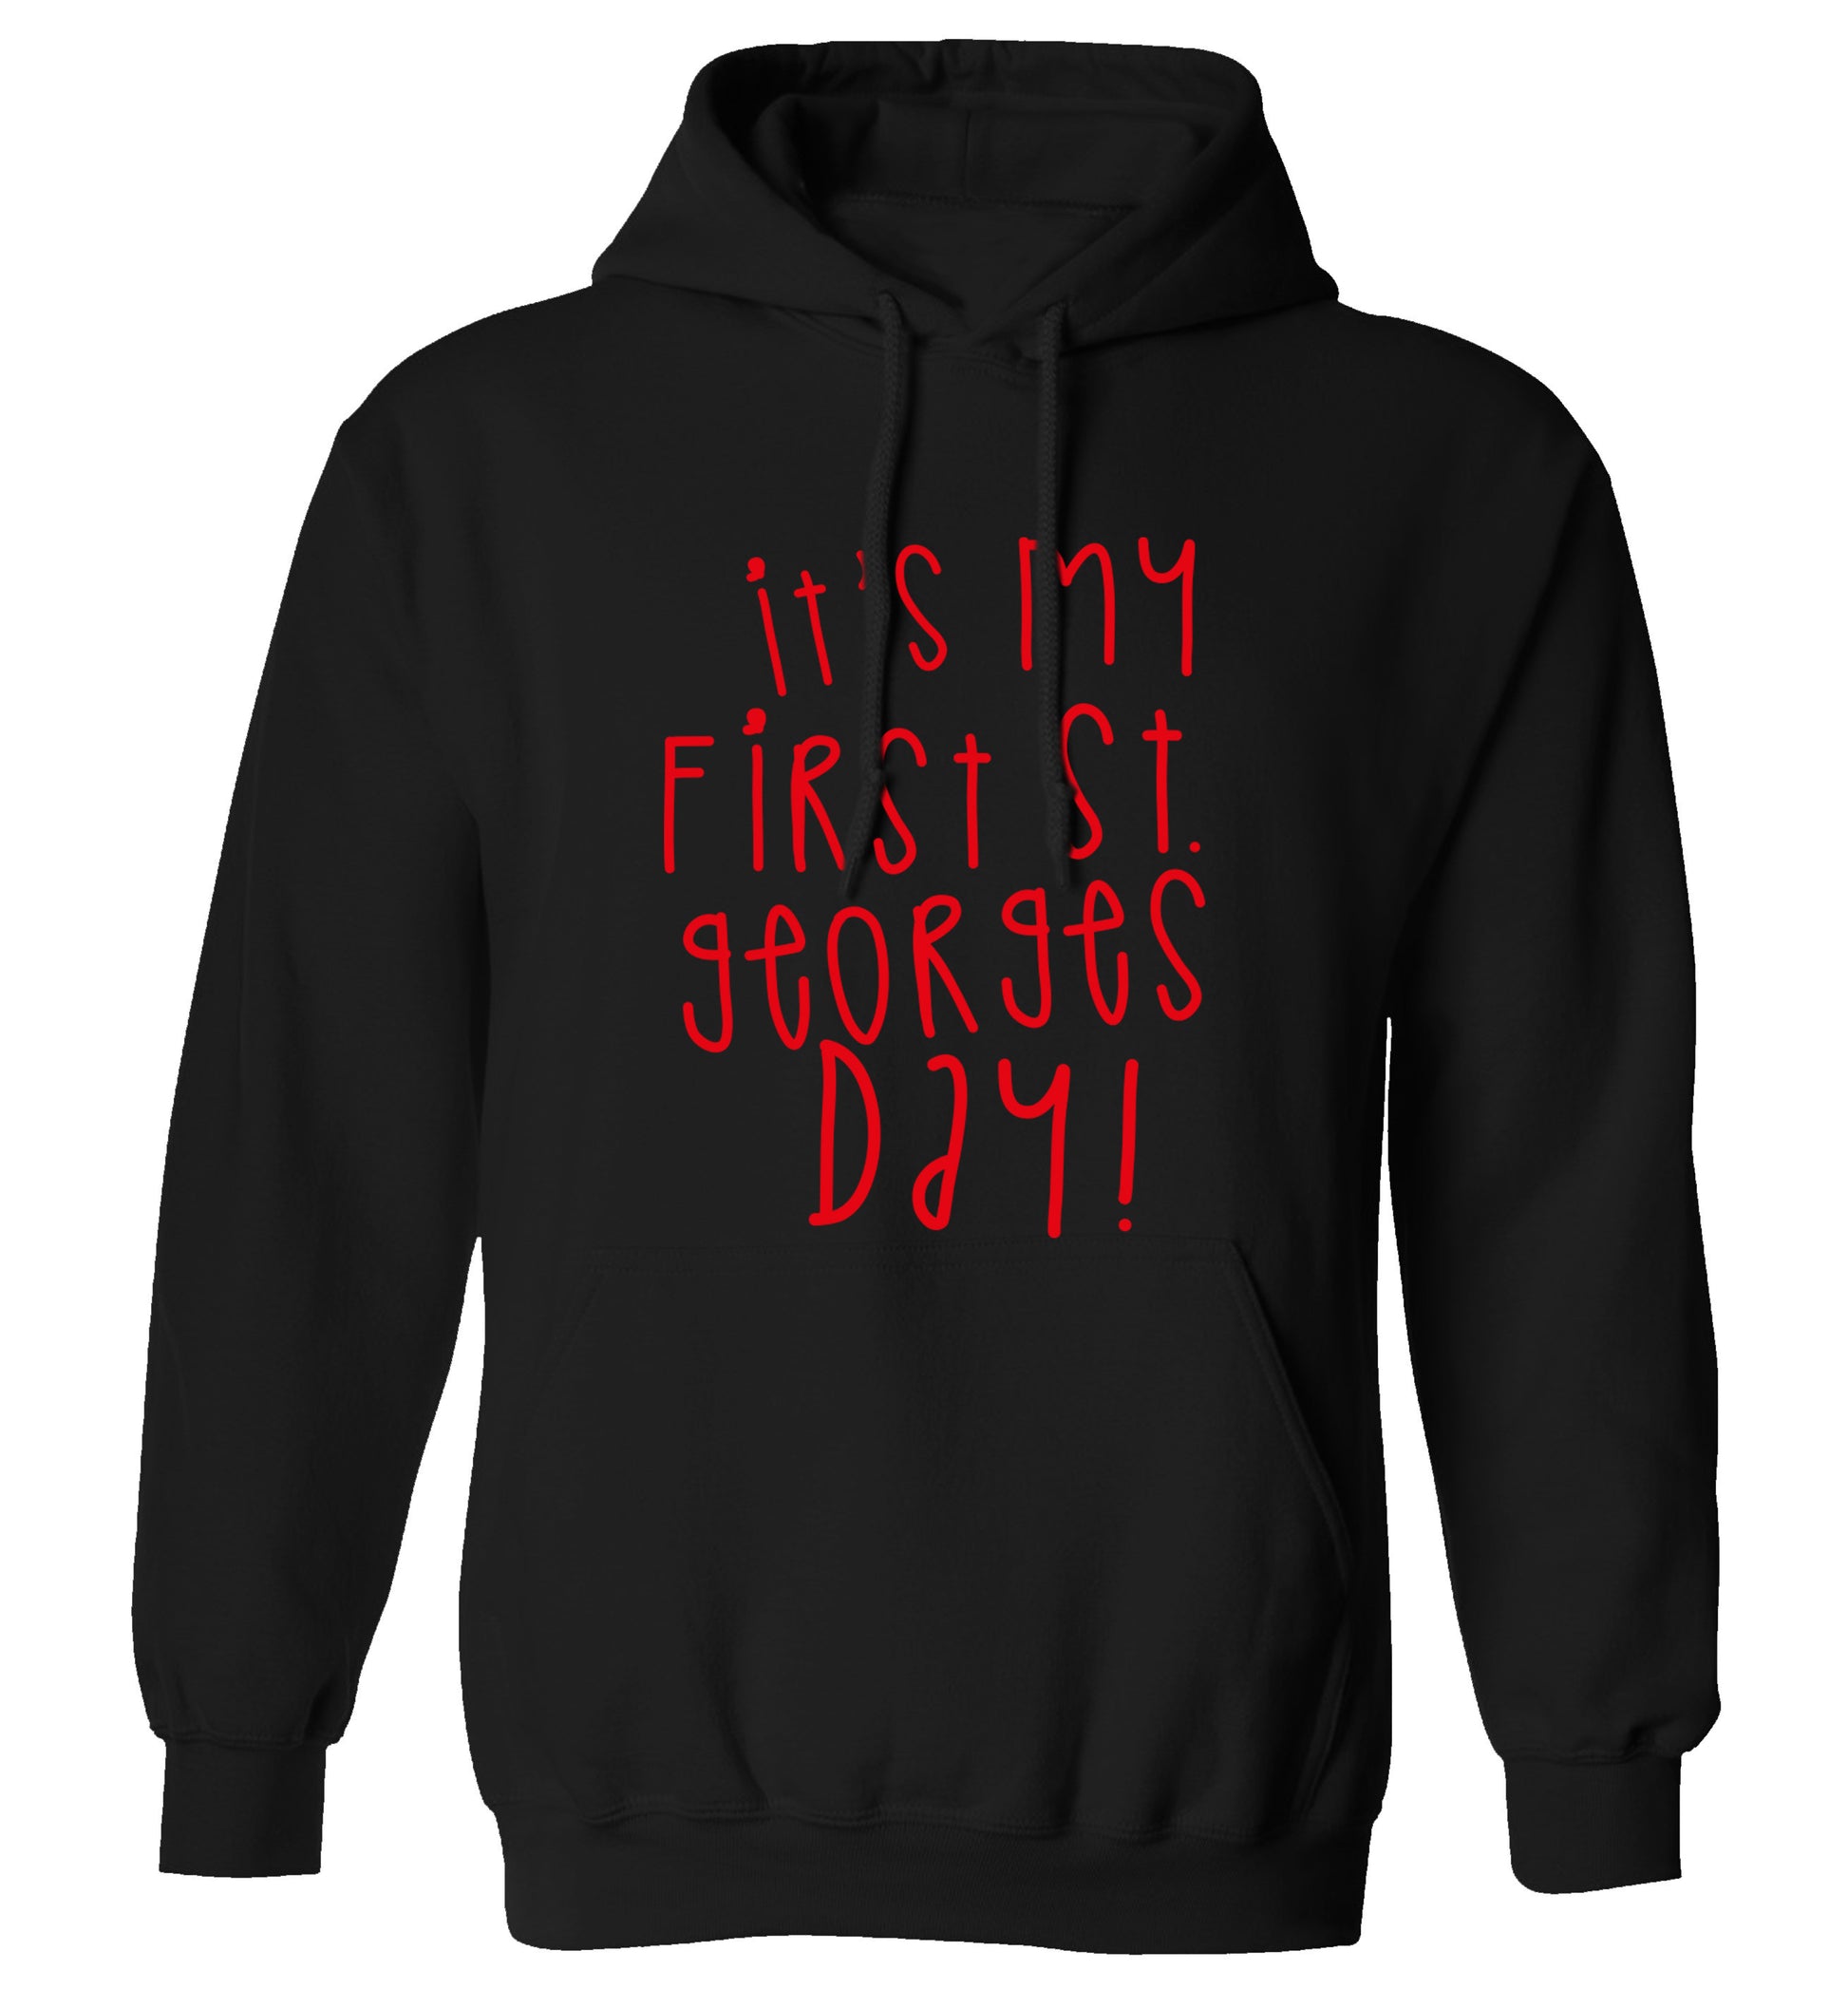 It's my first St Georges day adults unisex black hoodie 2XL